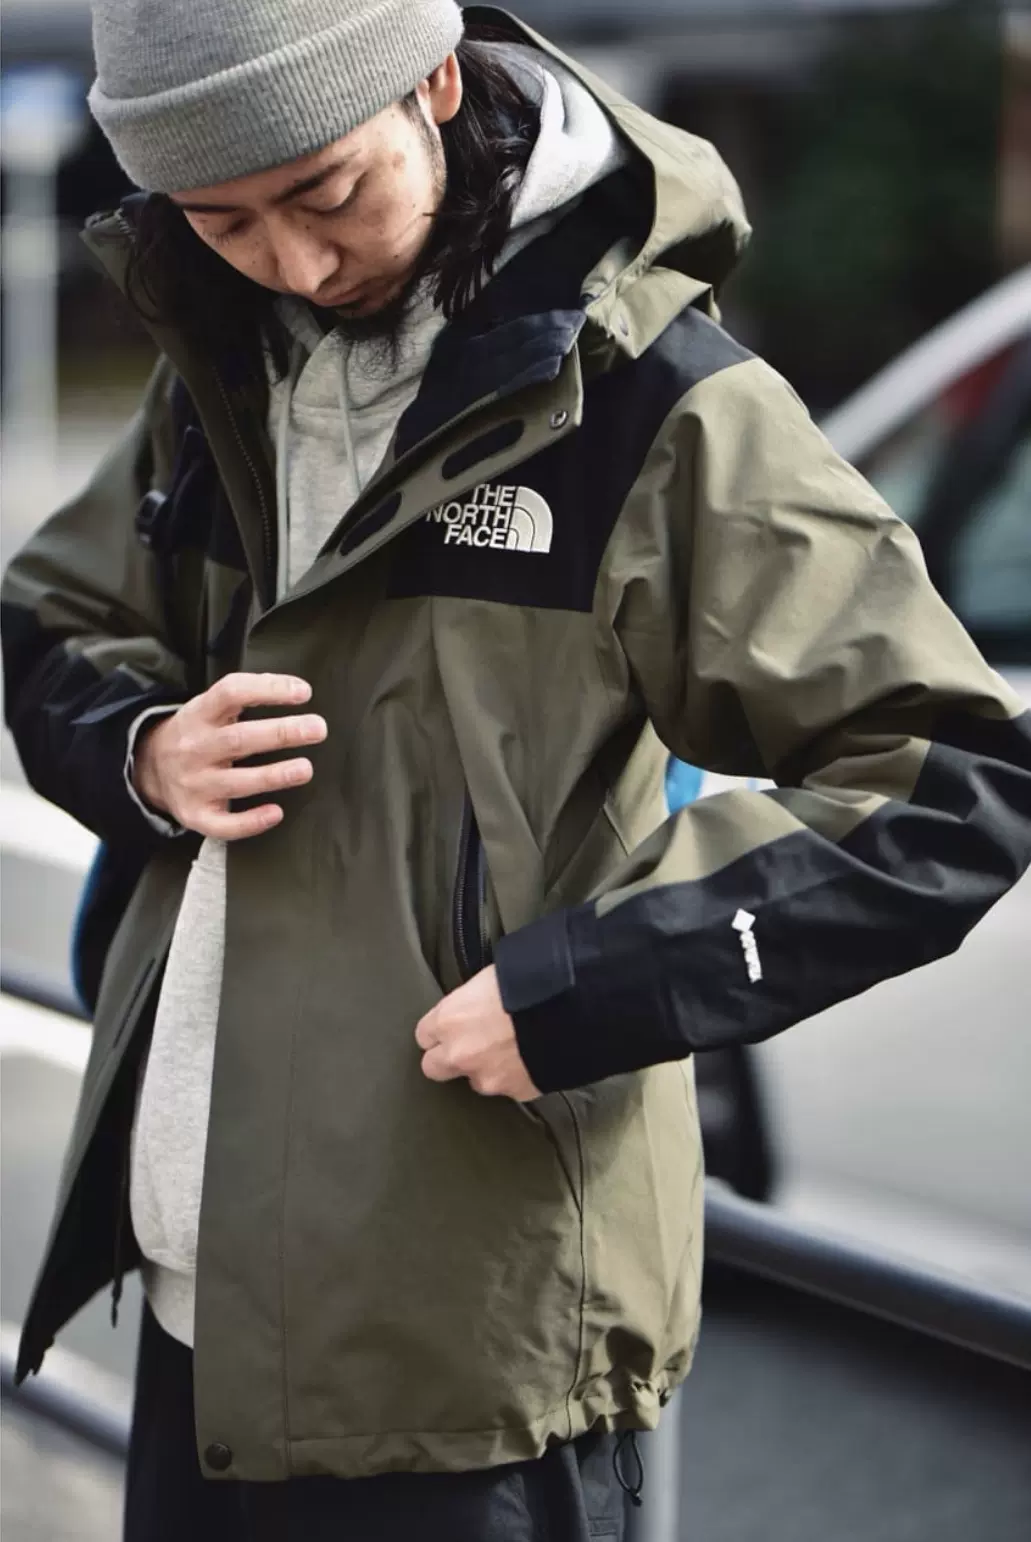 THE NORTH FACE MOUNTAIN JACKET 61800